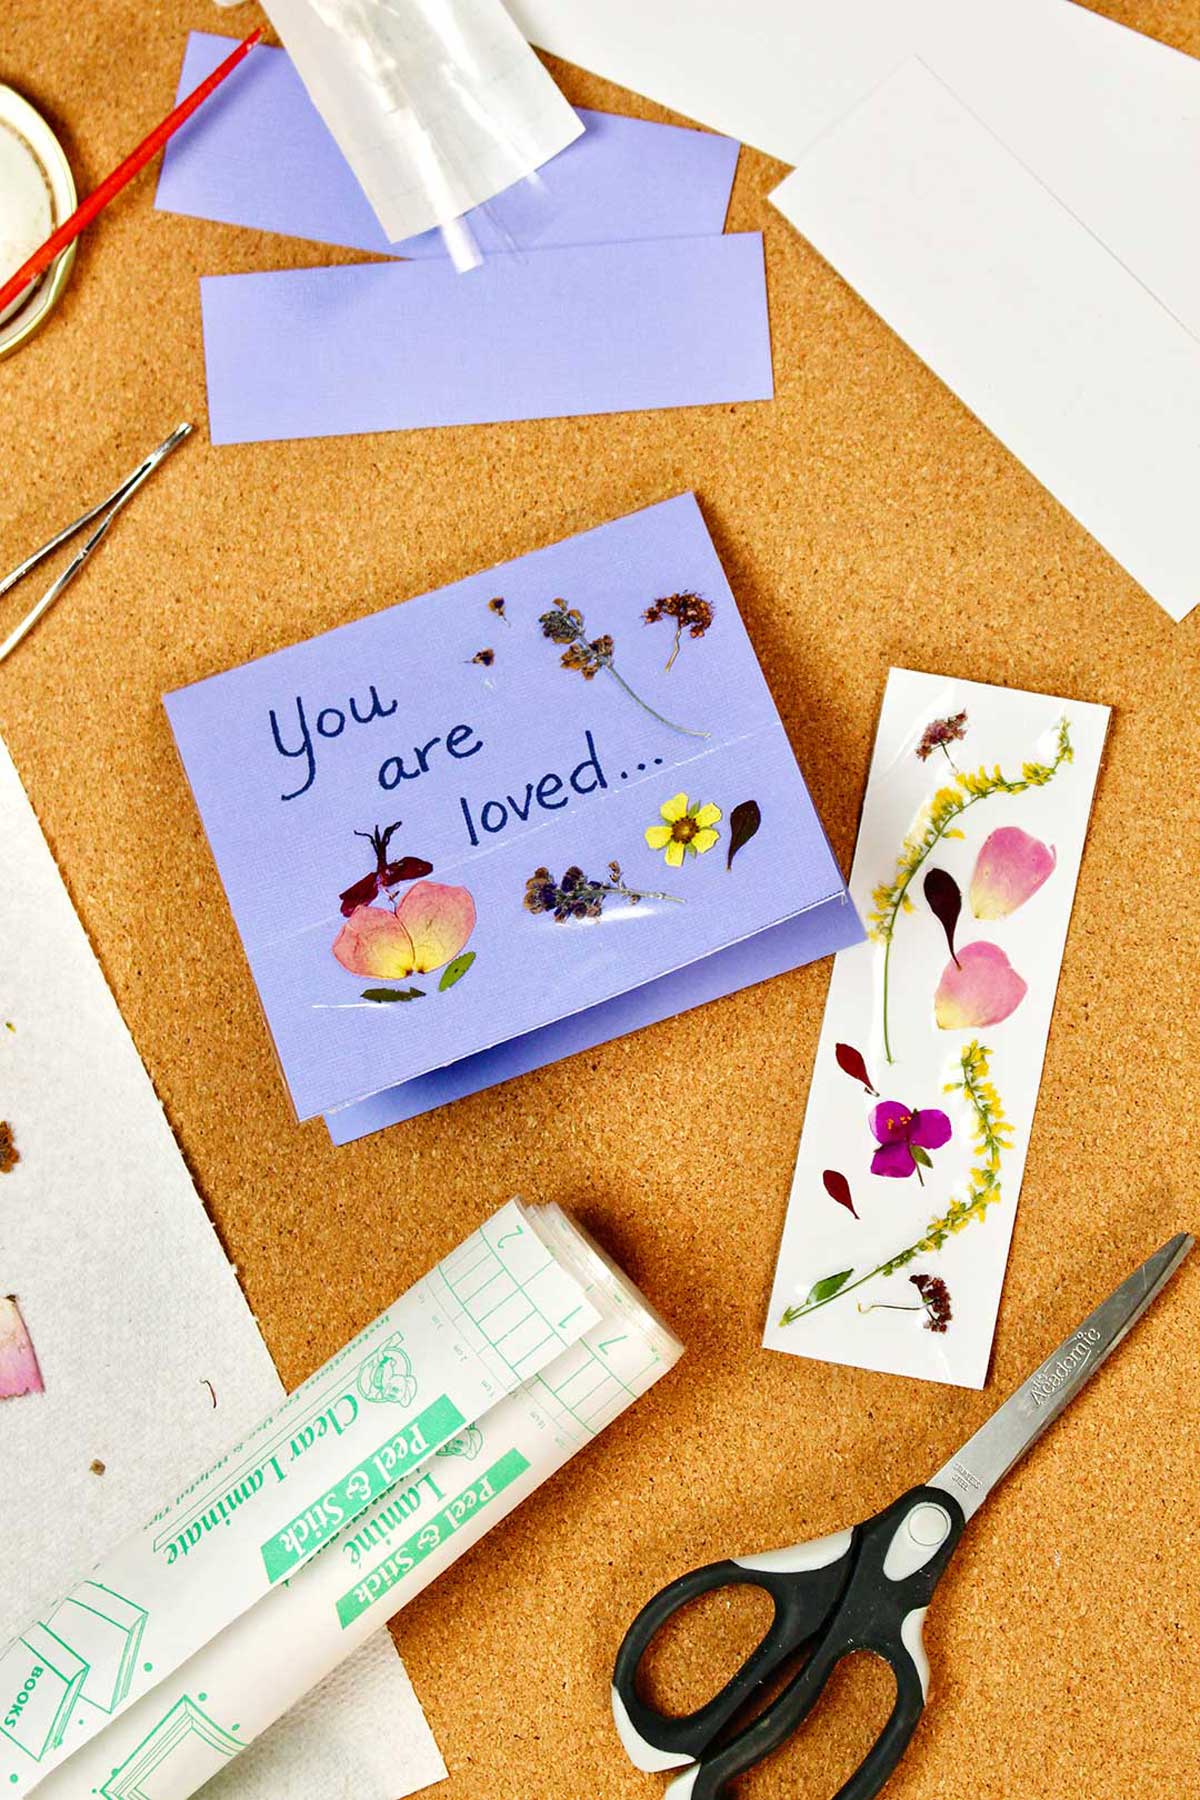 A purple card saying "You are loved..." with pressed flowers on it as well as a bookmark with pressed flowers.